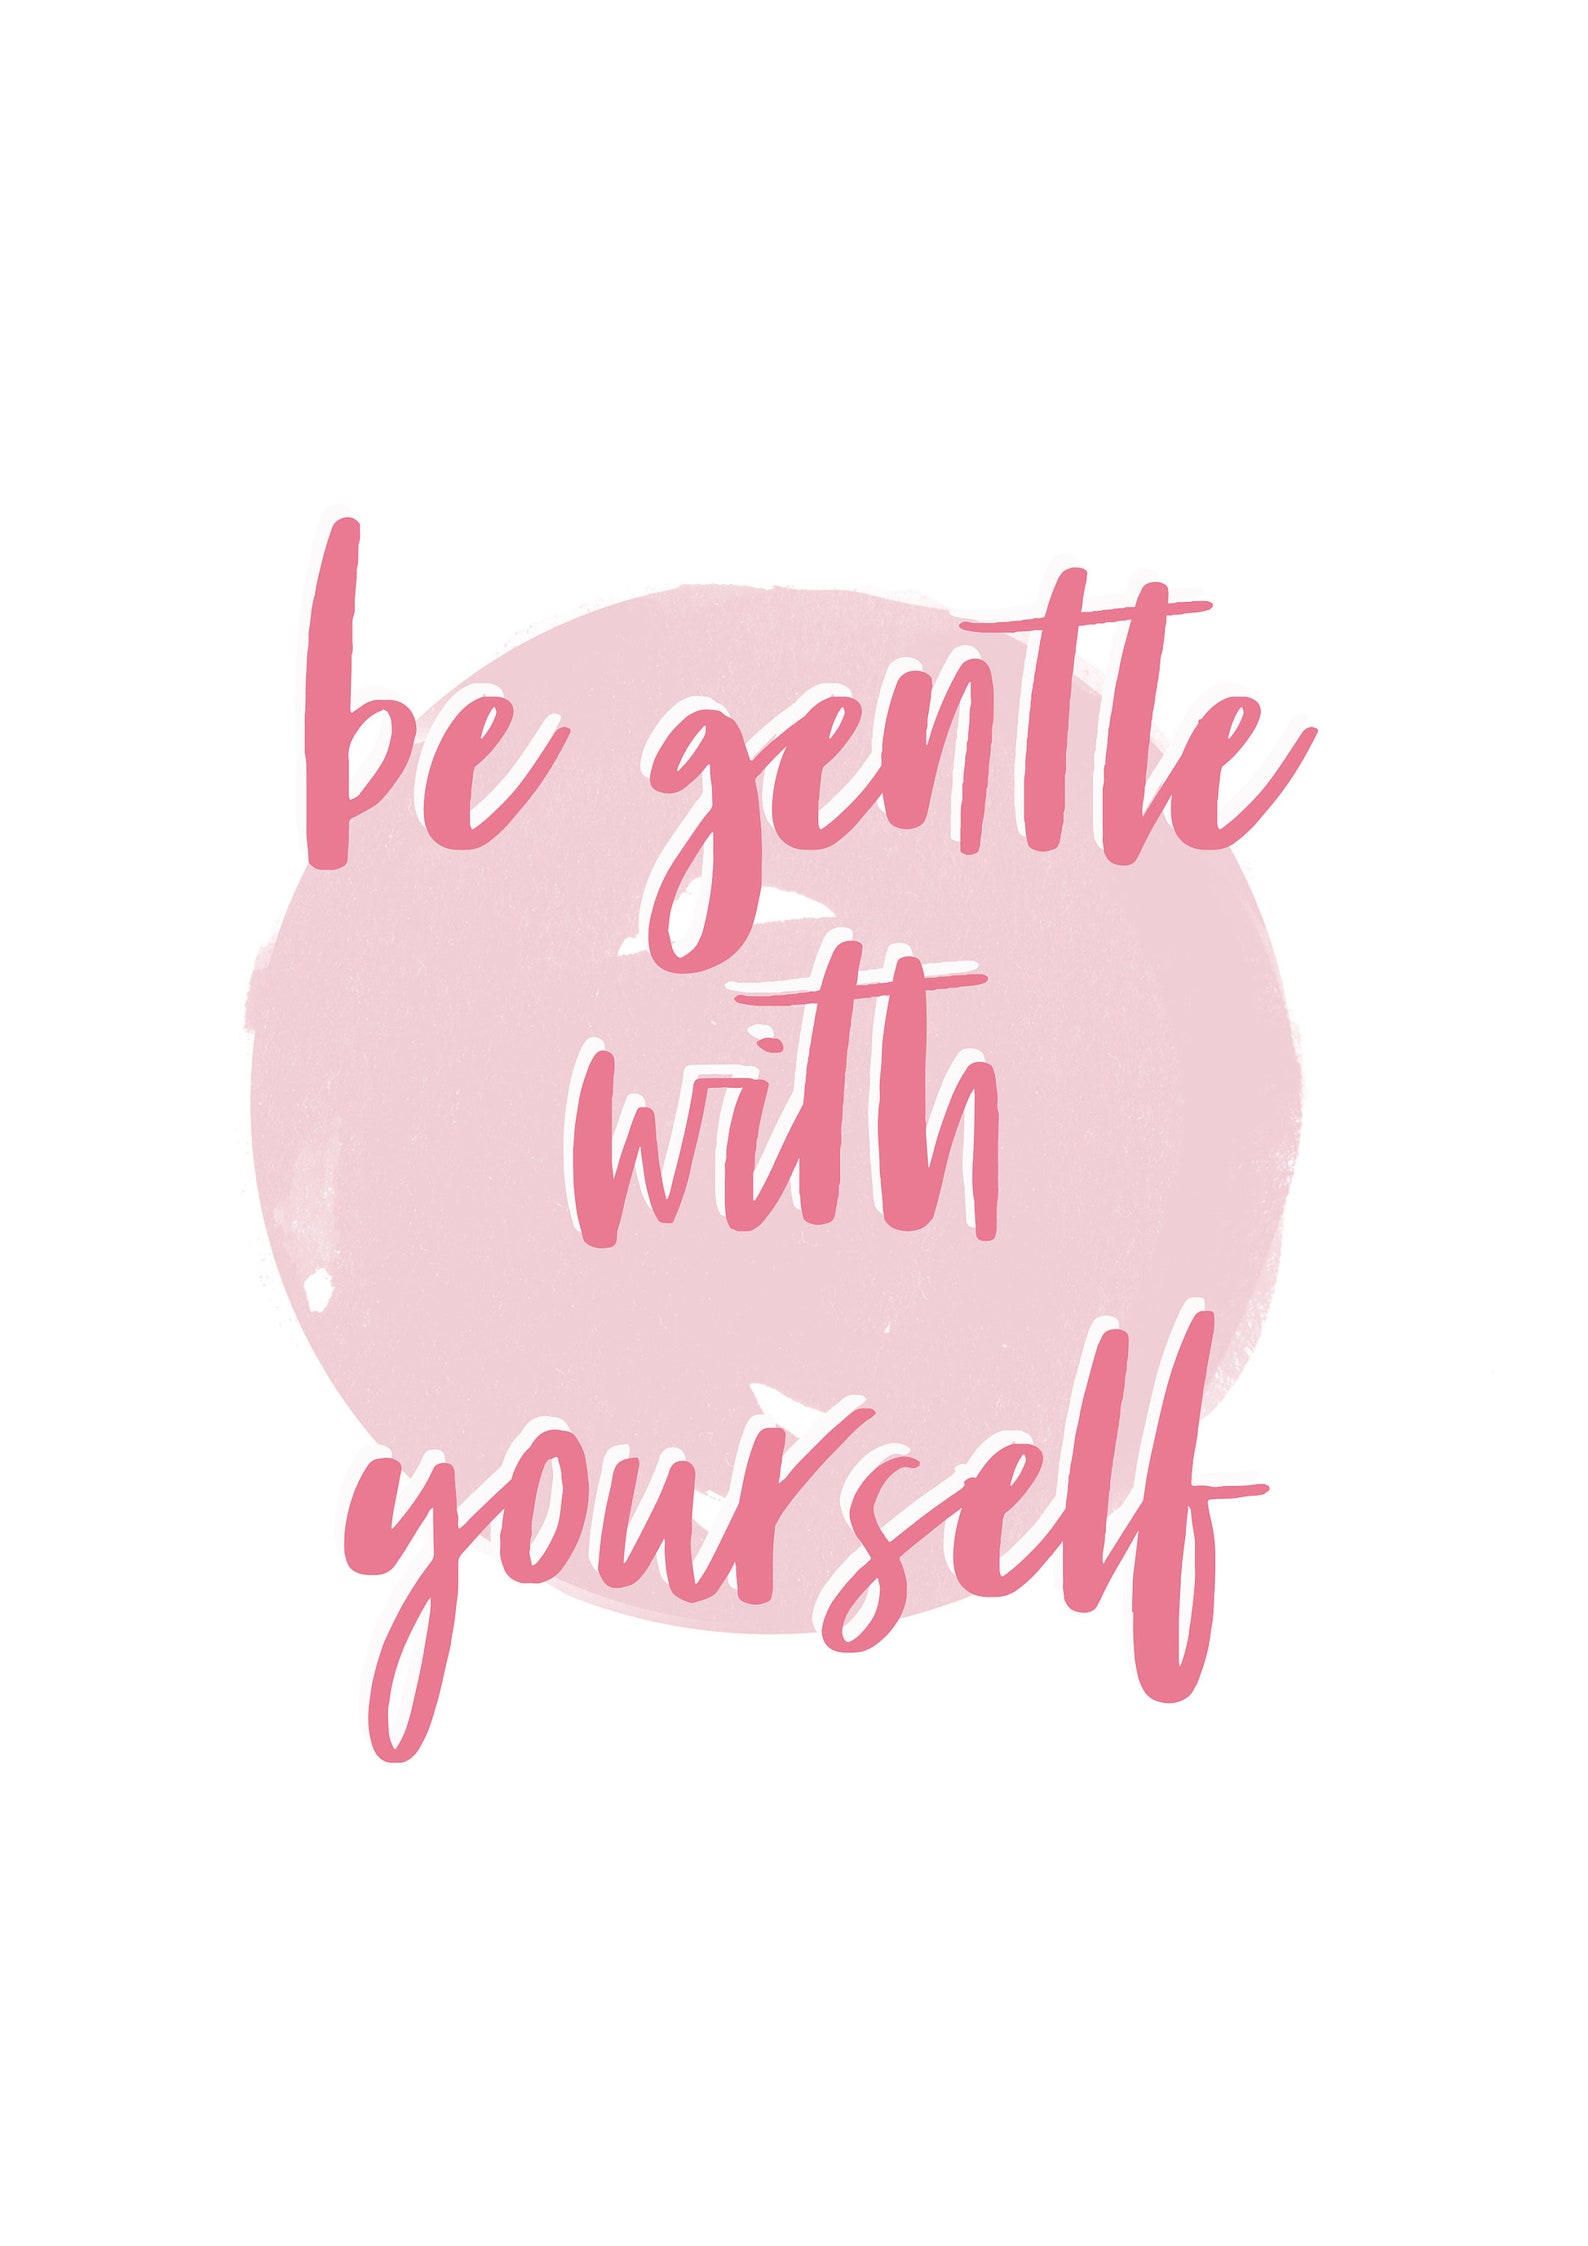 Be Gentle with yourself A5 print. Positive quote // Positive | Etsy